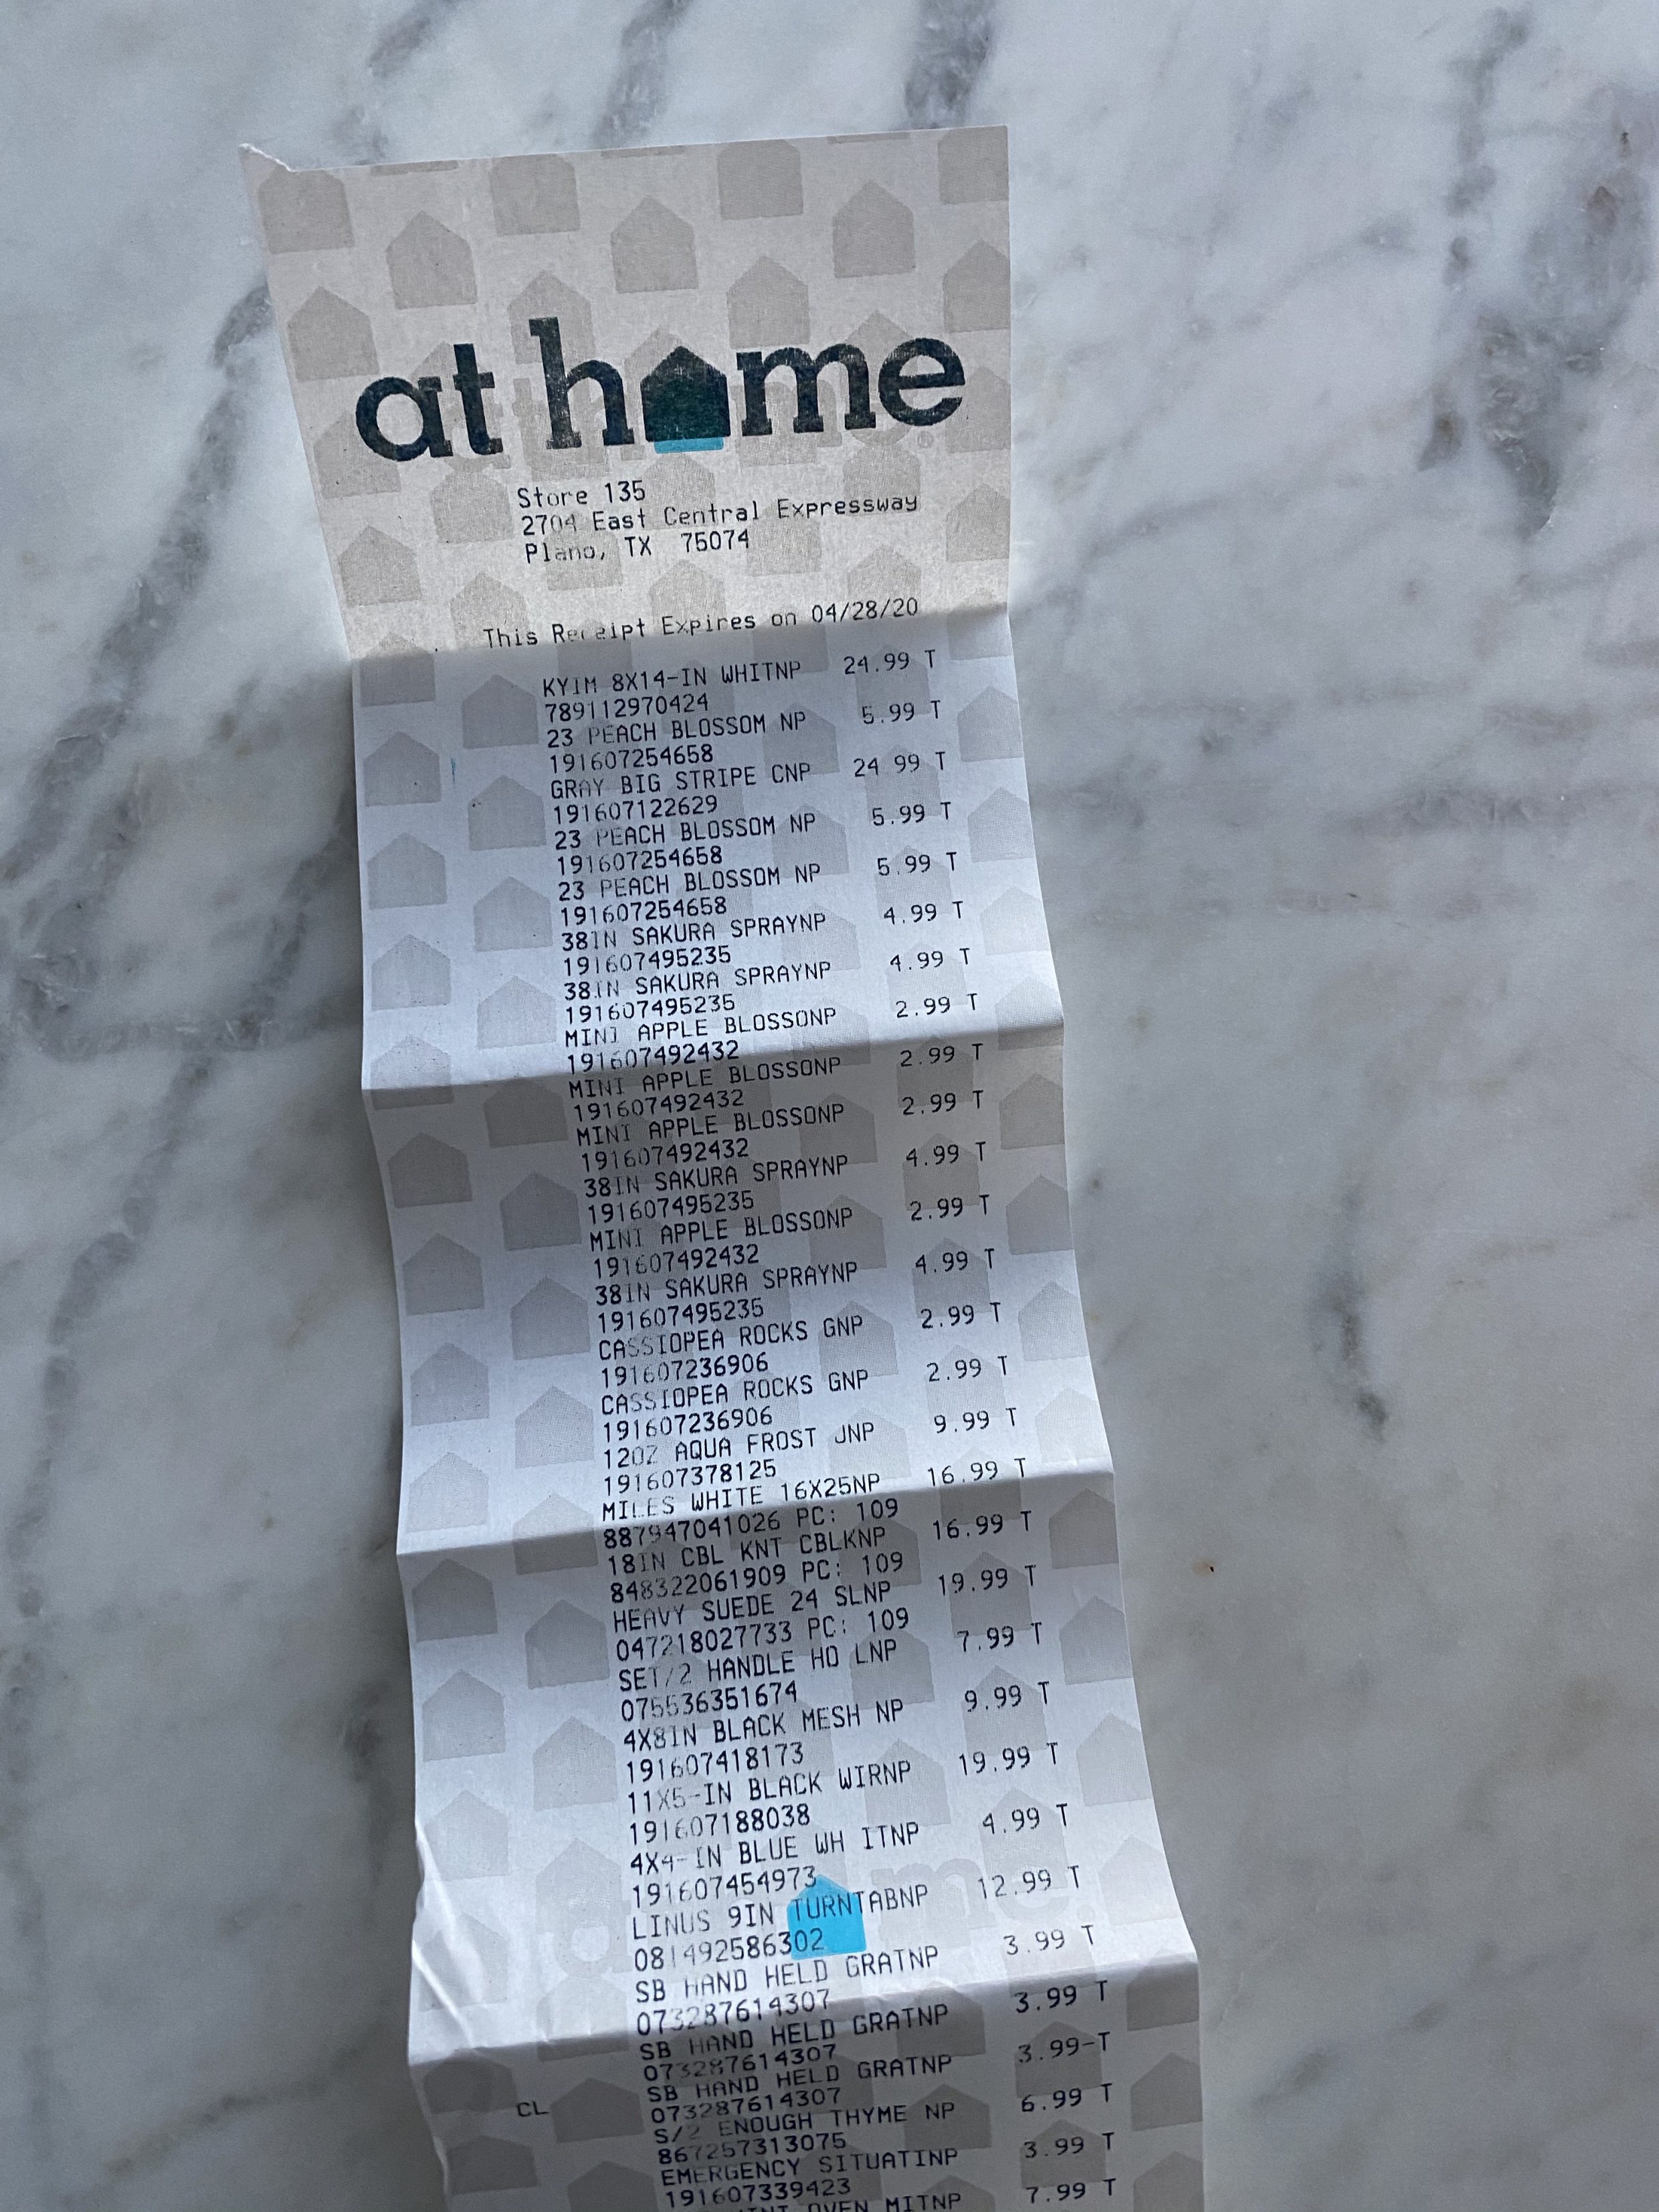 Blogger Hoang-Kim shares her At Home receipt from a spring home decor shopping trip